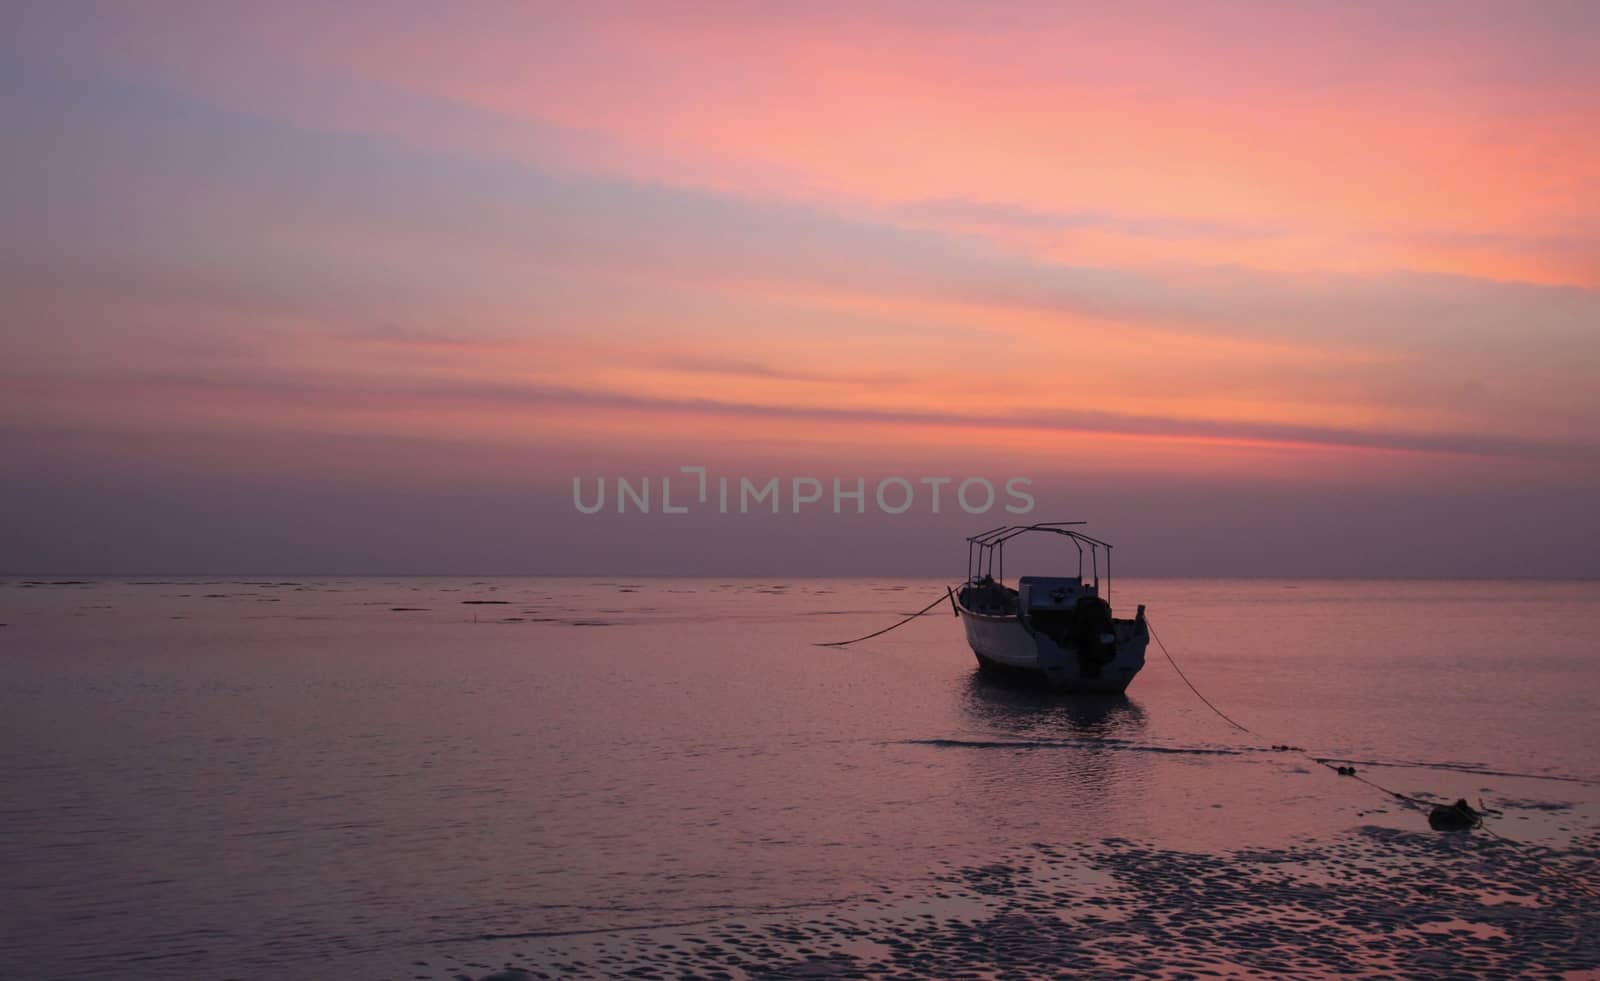 The low tide of predawn and dead calm sea immobilises this lone boat anchored near shoreline while the approaching dawn is reflected by the shades of blue and orange in the sky.